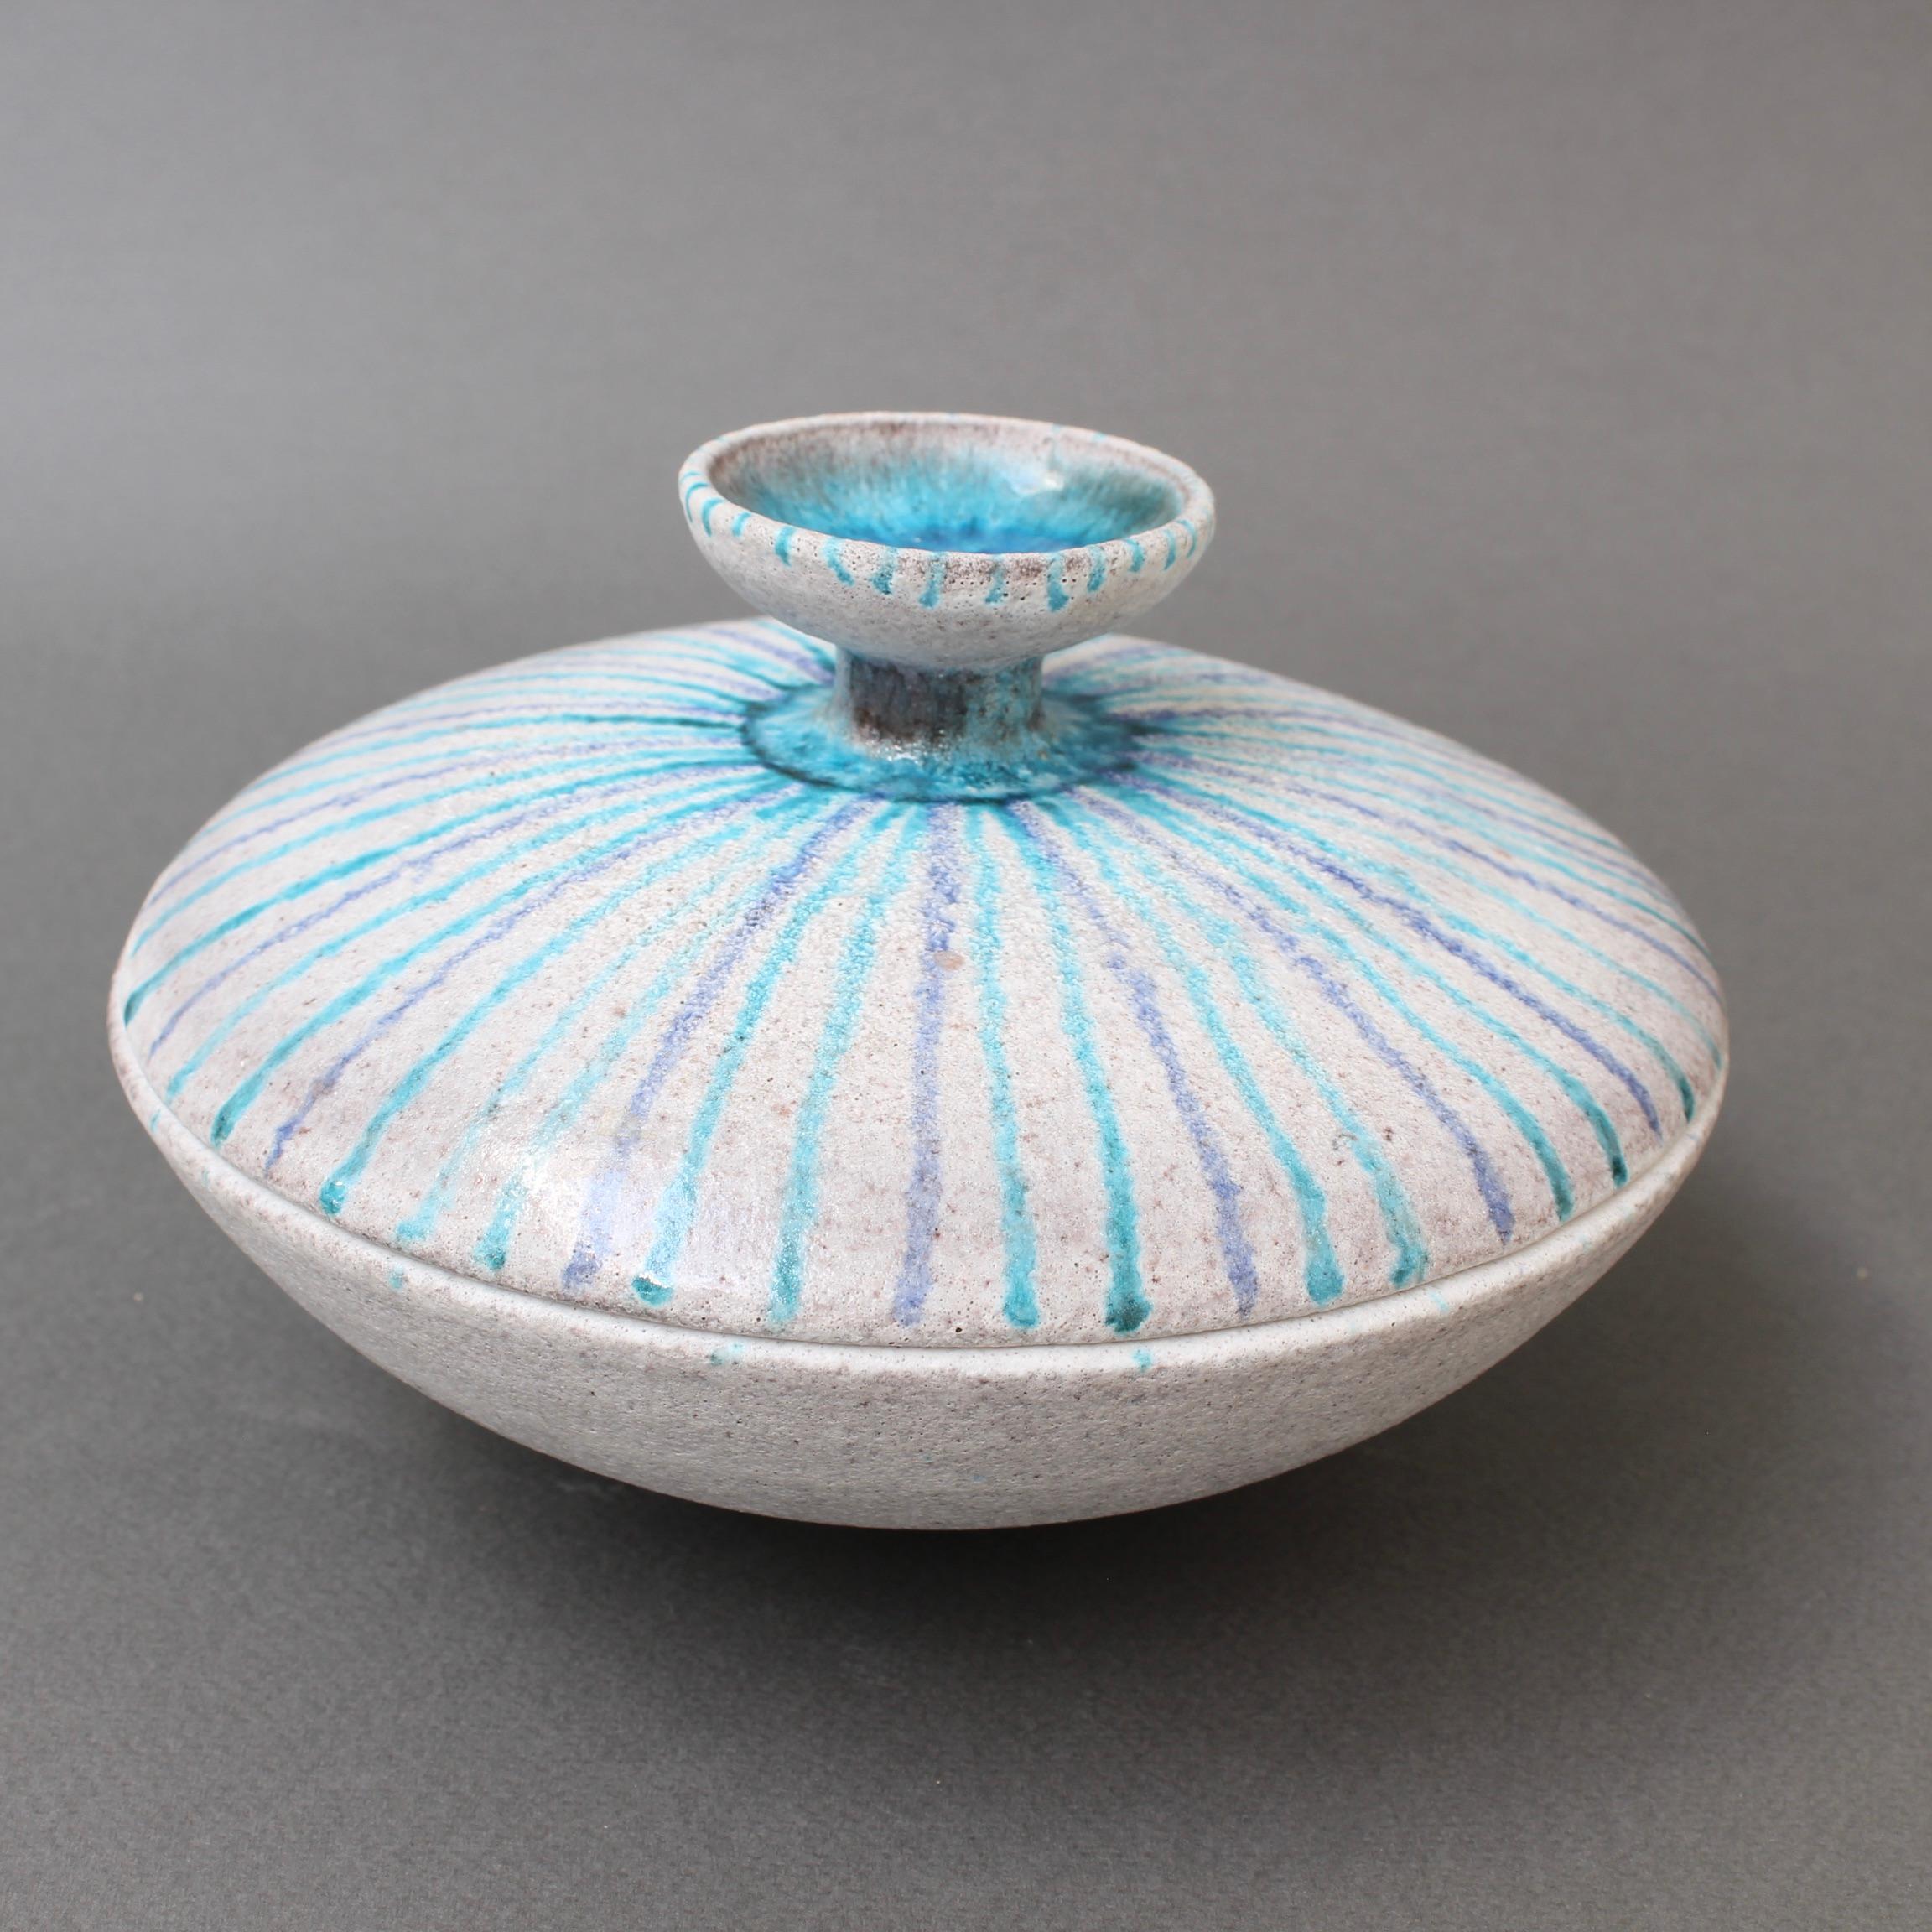 Vintage Italian Ceramic Candy Dish by Guido Gambone, circa 1950s For Sale 8